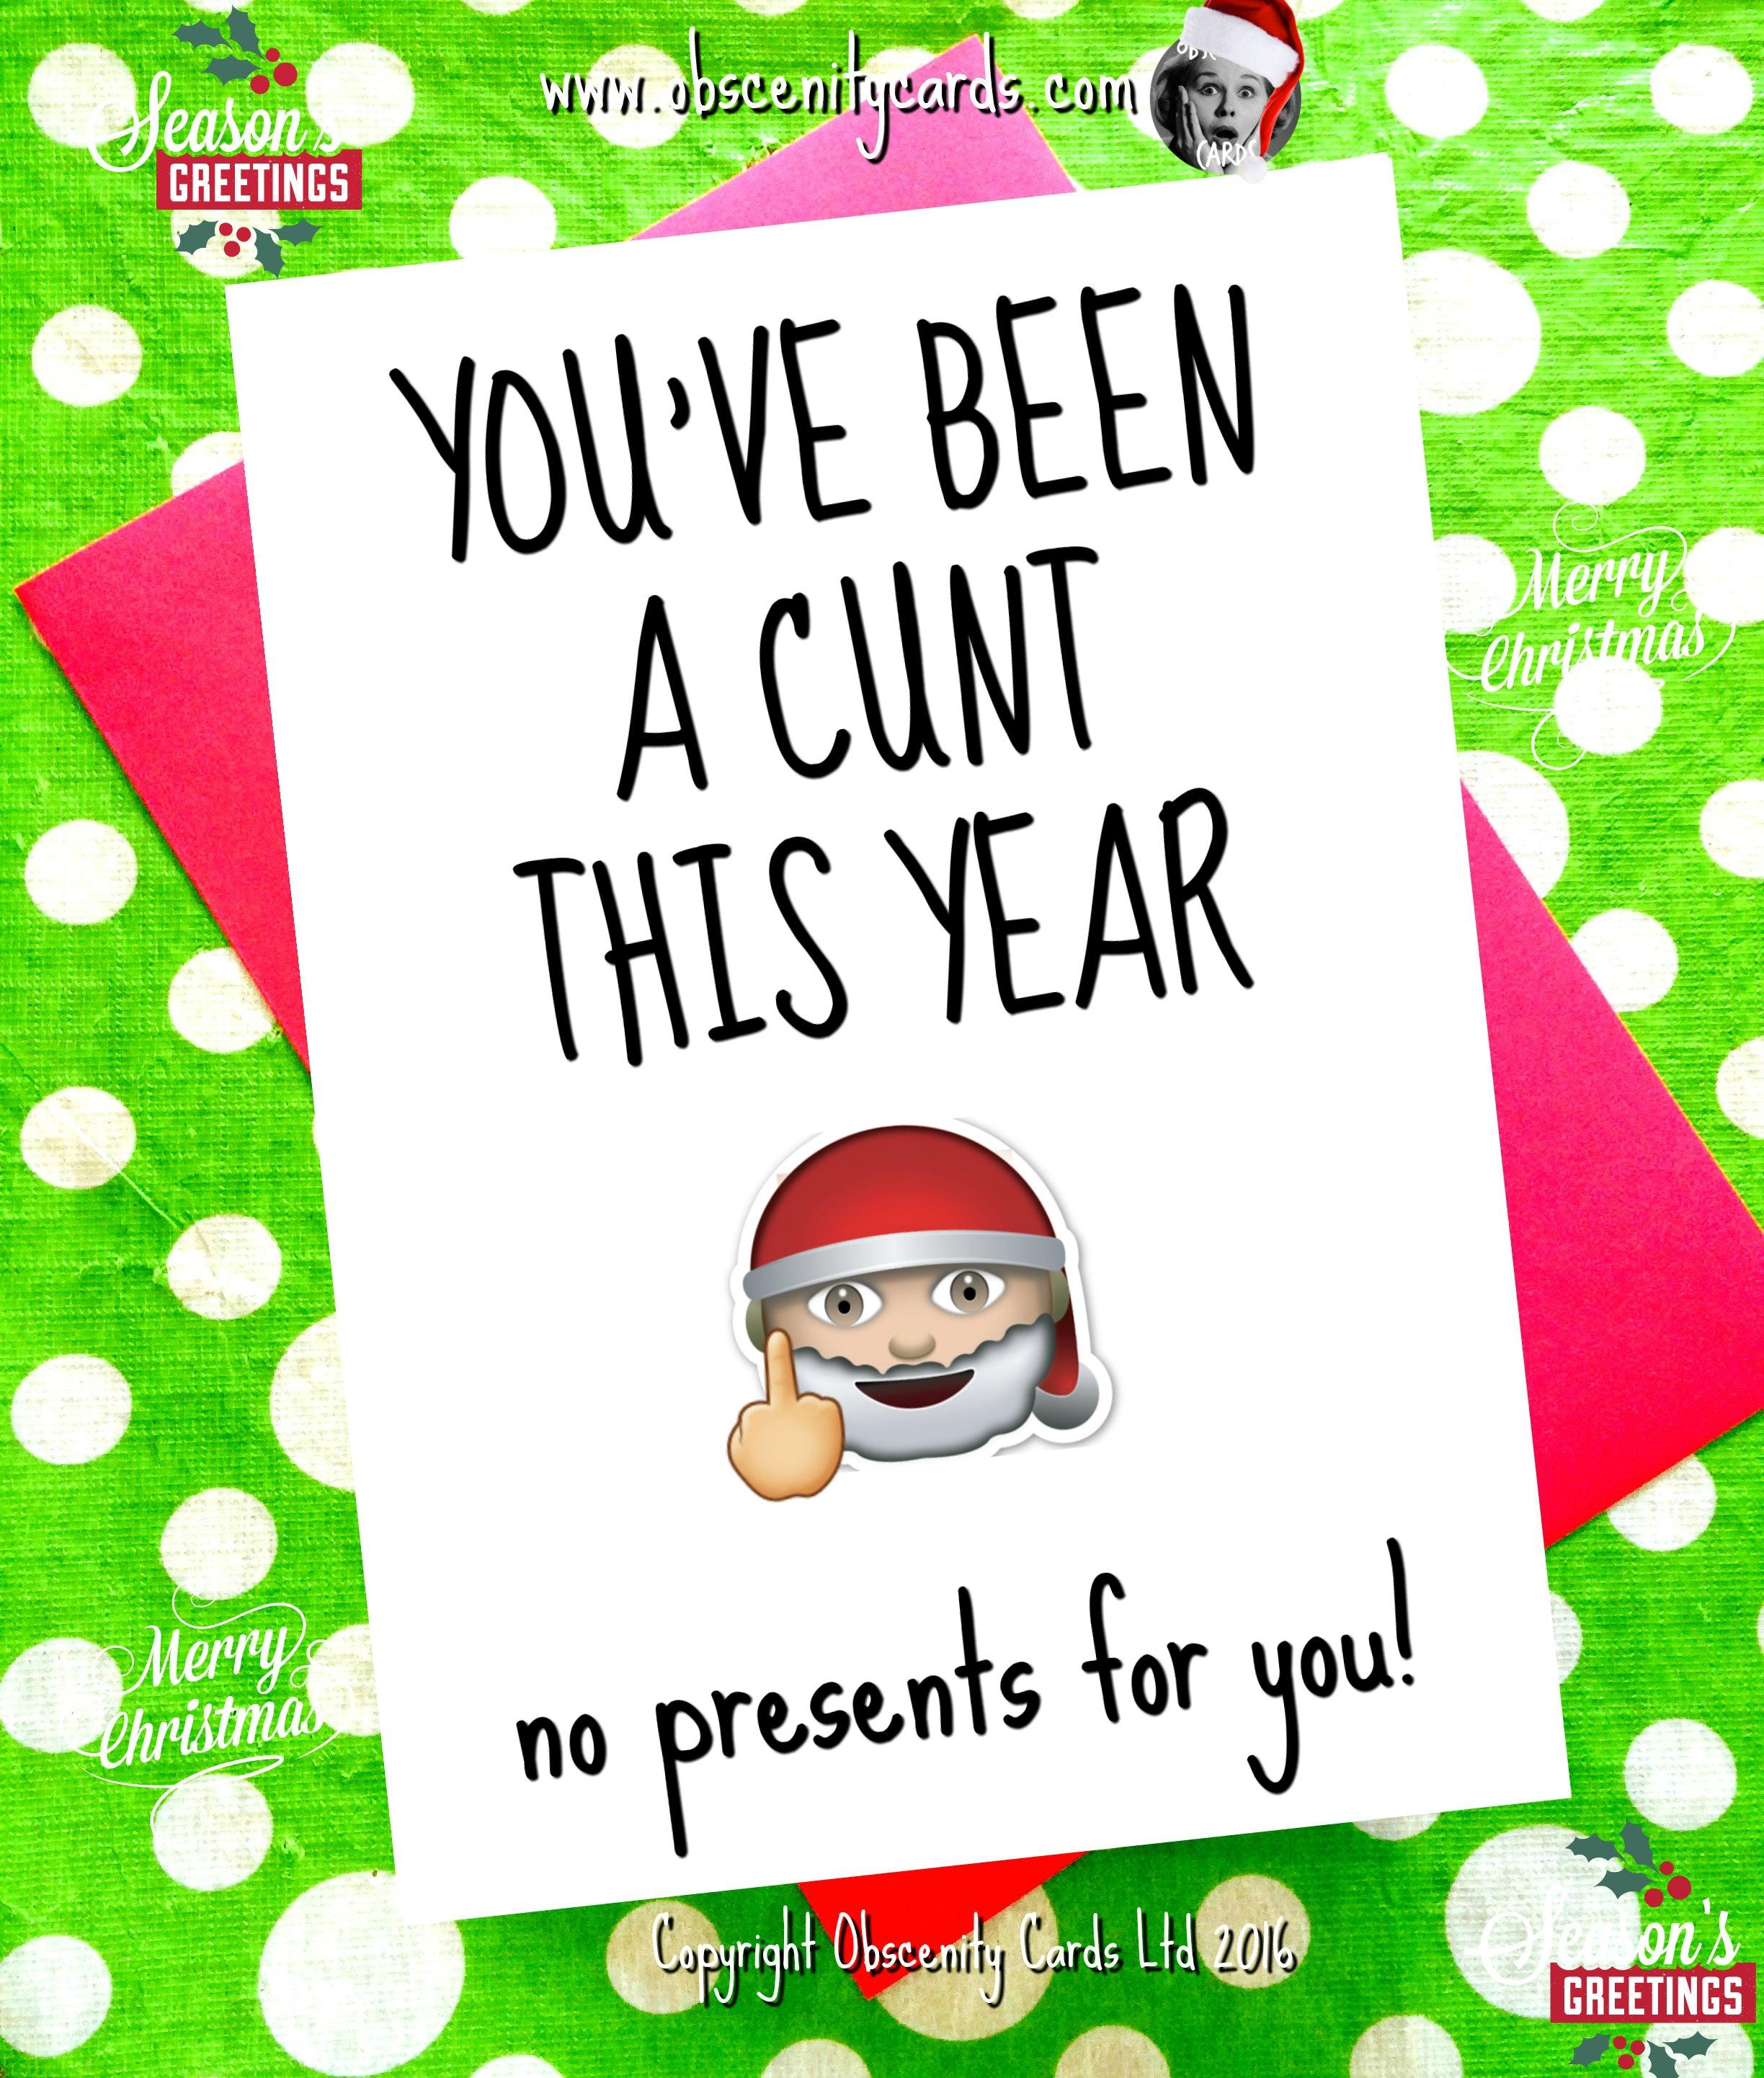 Funny Christmas Card - You've been a cunt this year! No presents for you2448 x 2884